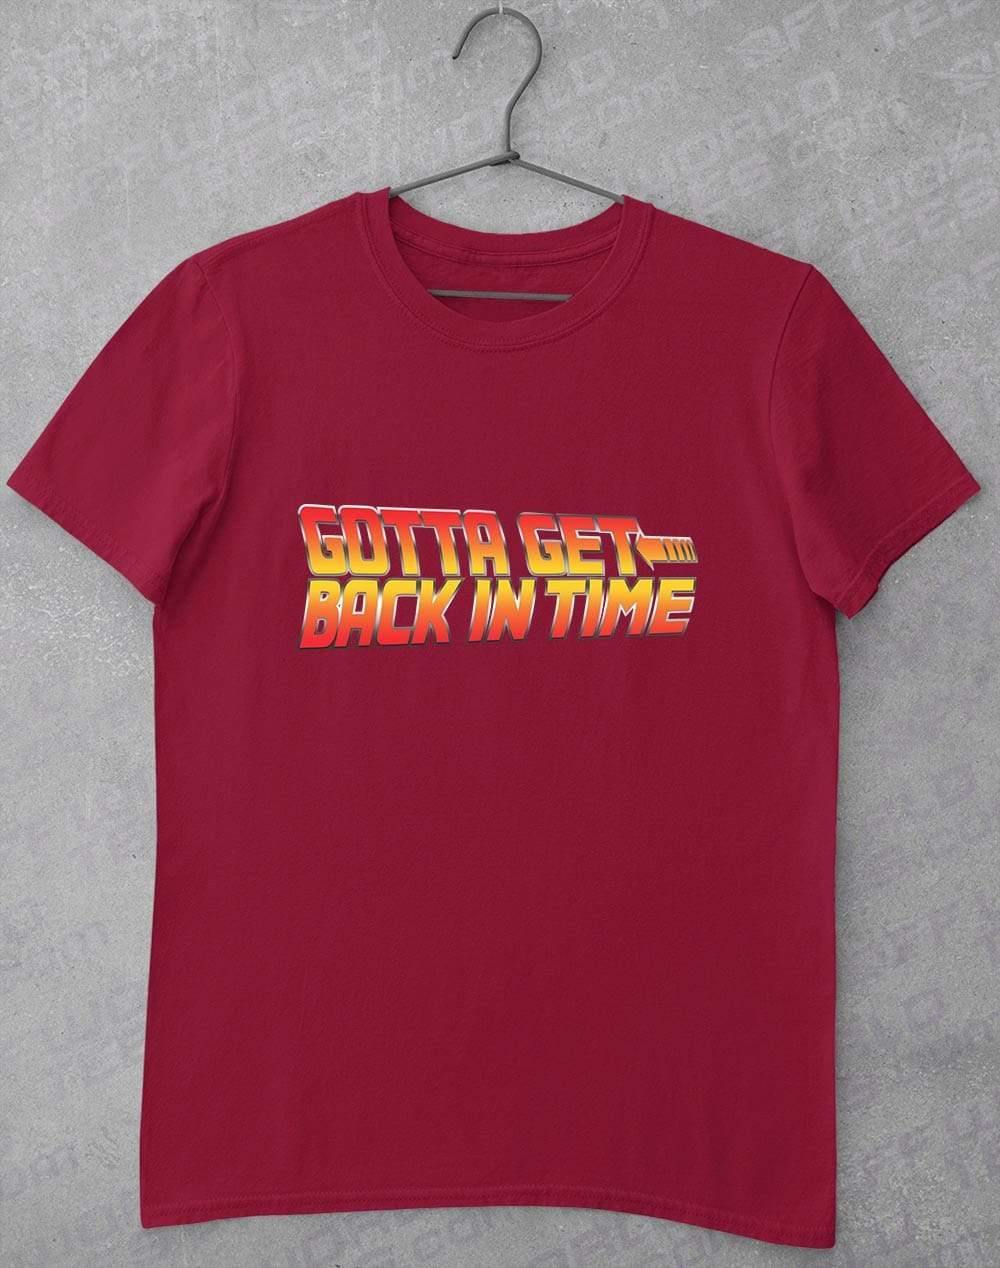 Back in Time T-Shirt S / Cardinal Red  - Off World Tees